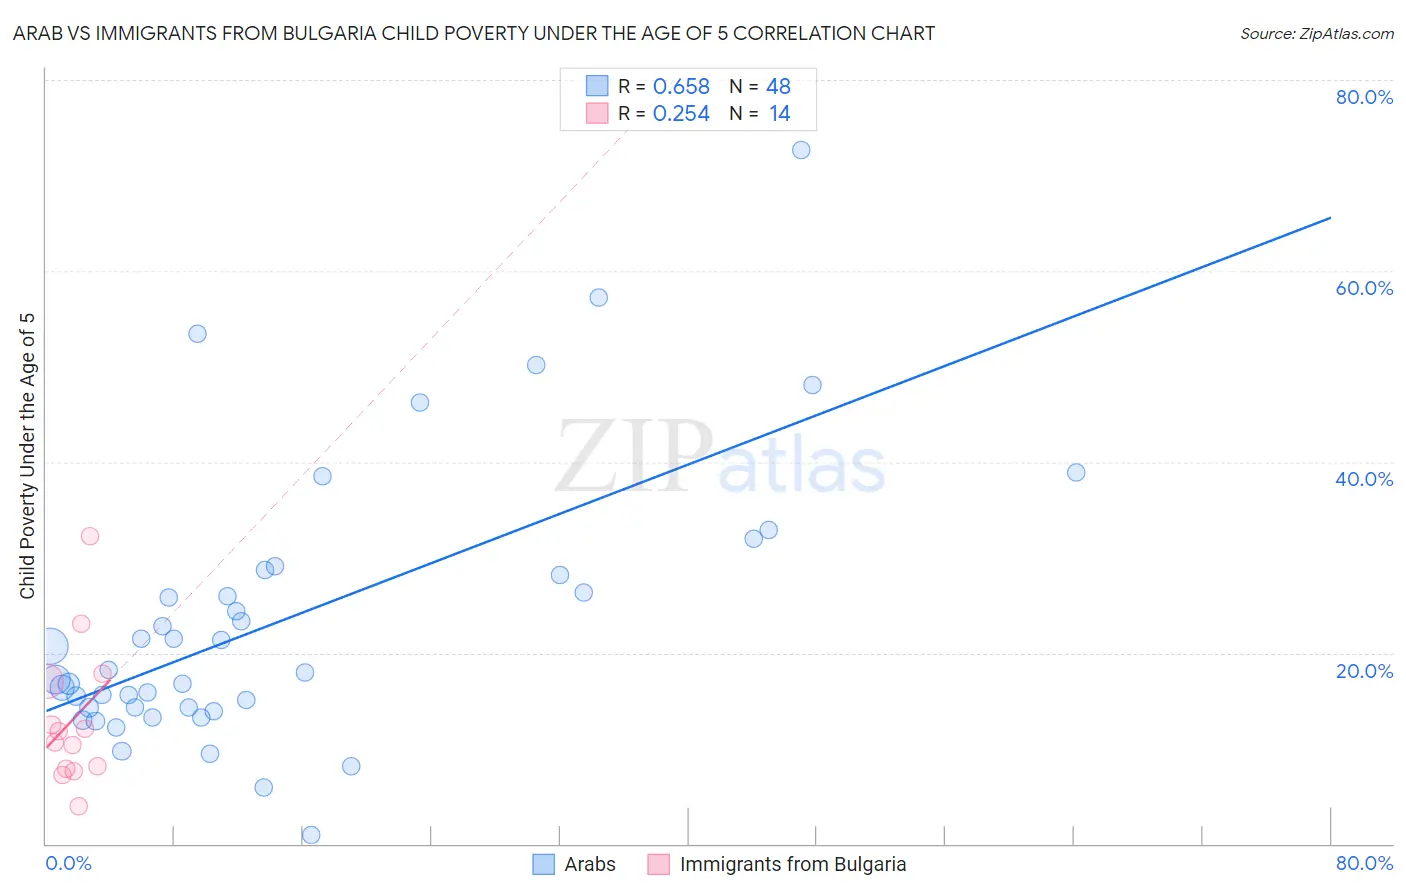 Arab vs Immigrants from Bulgaria Child Poverty Under the Age of 5